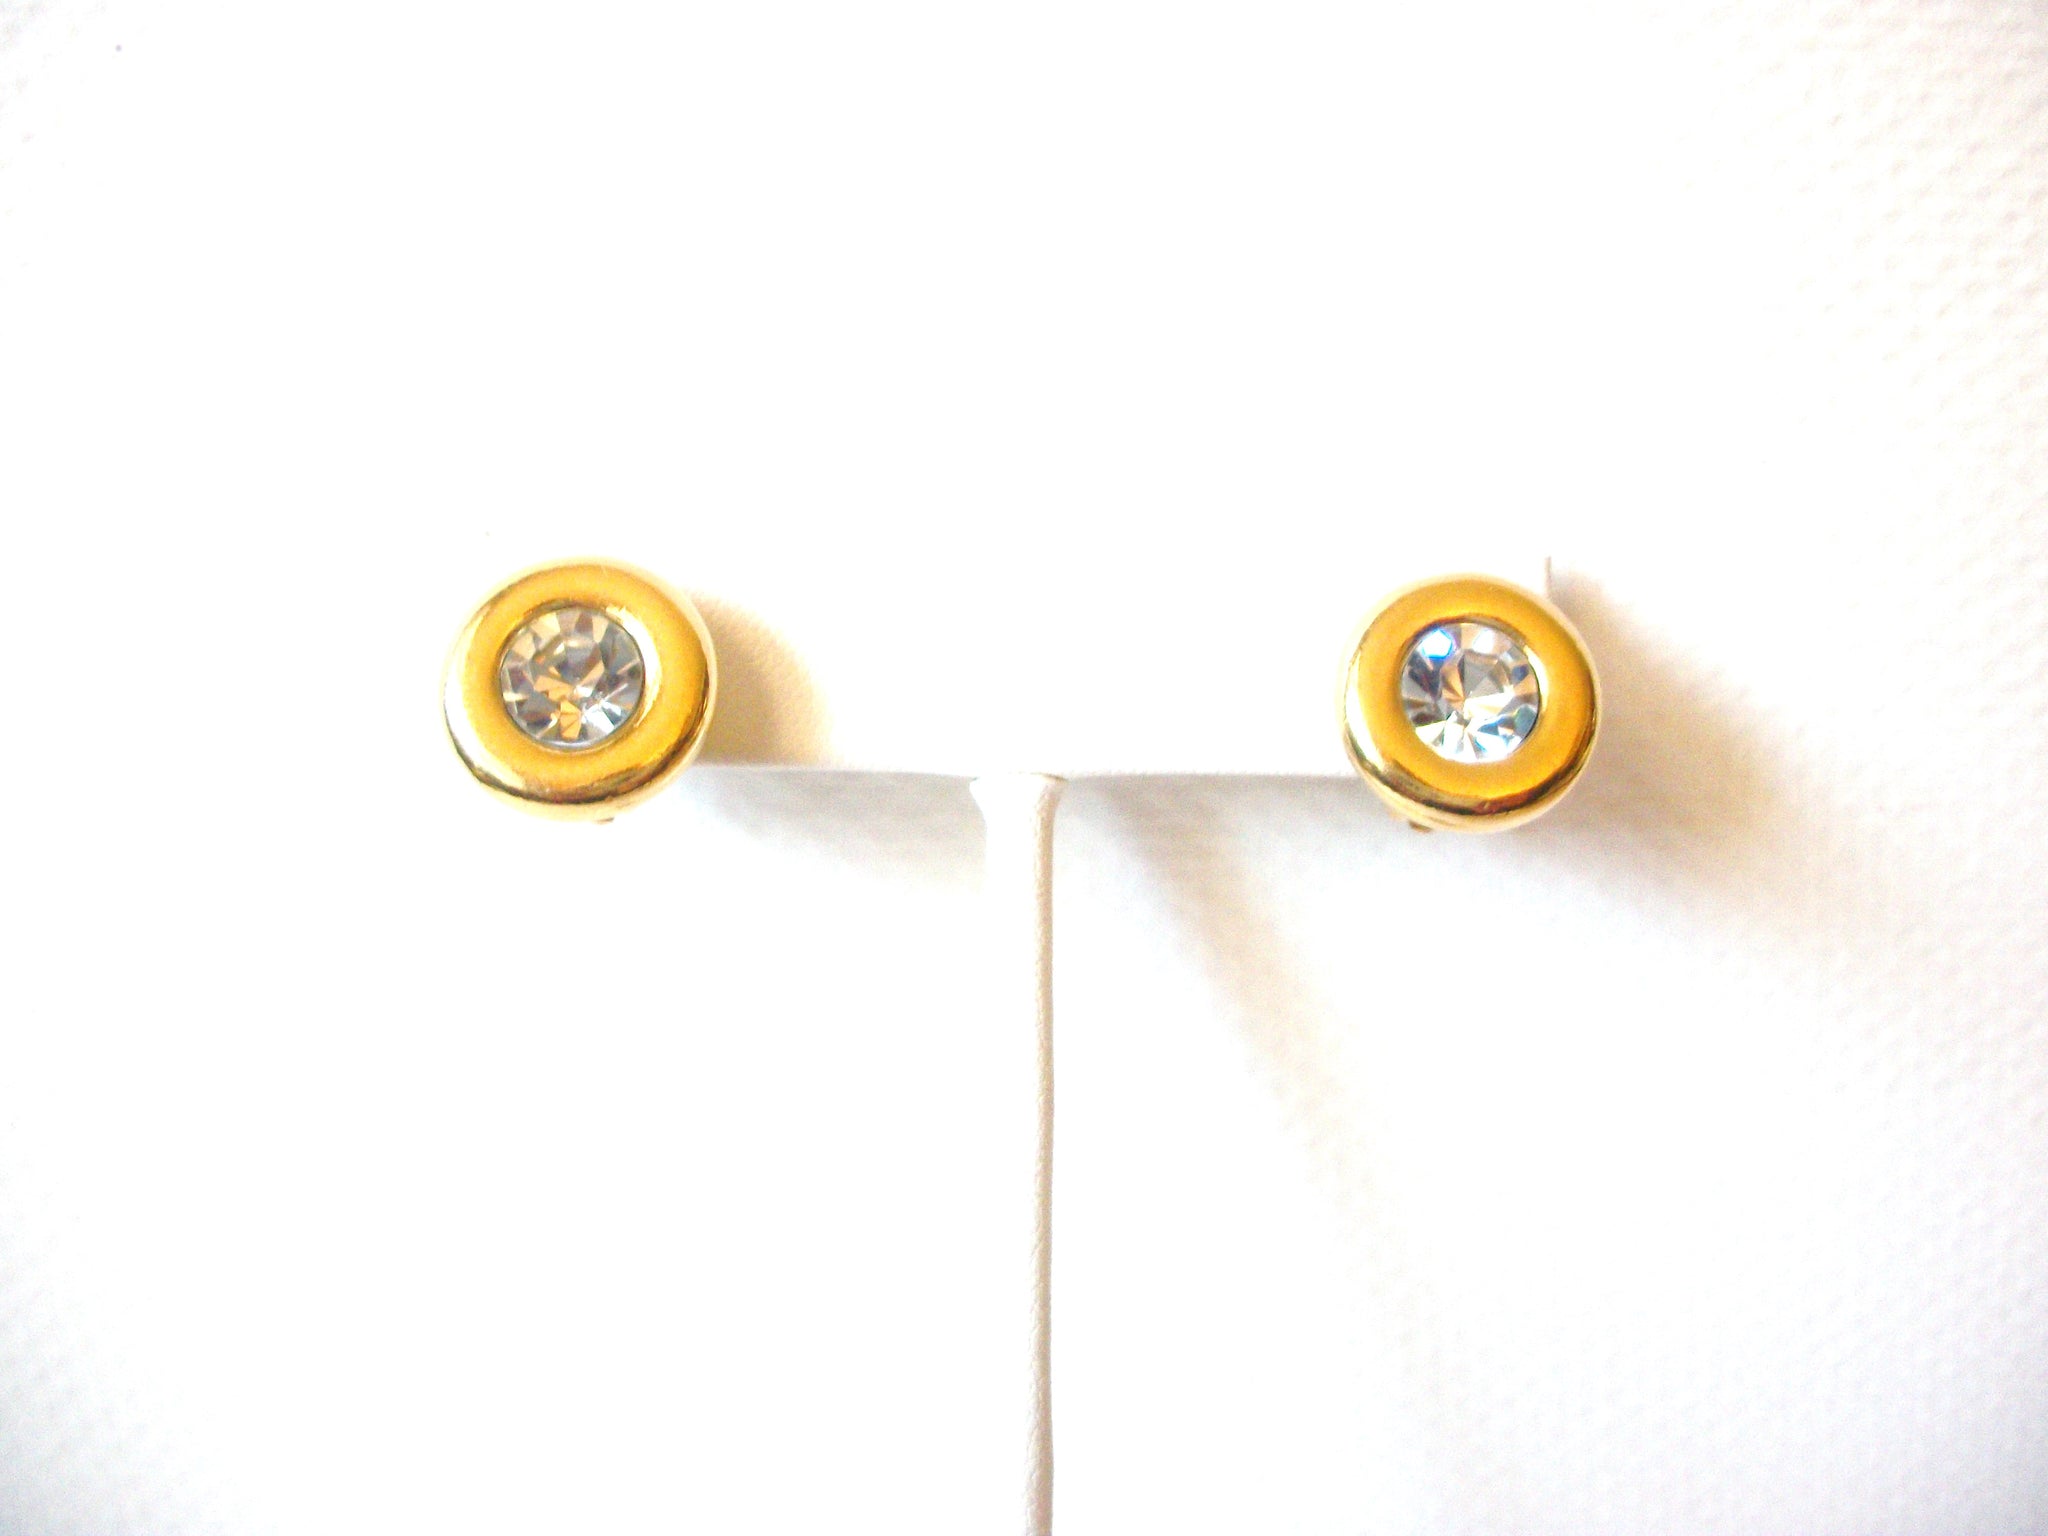 AVON Vintage Small Gold Toned Round Clear Rhinestone Stud Earrings 92216